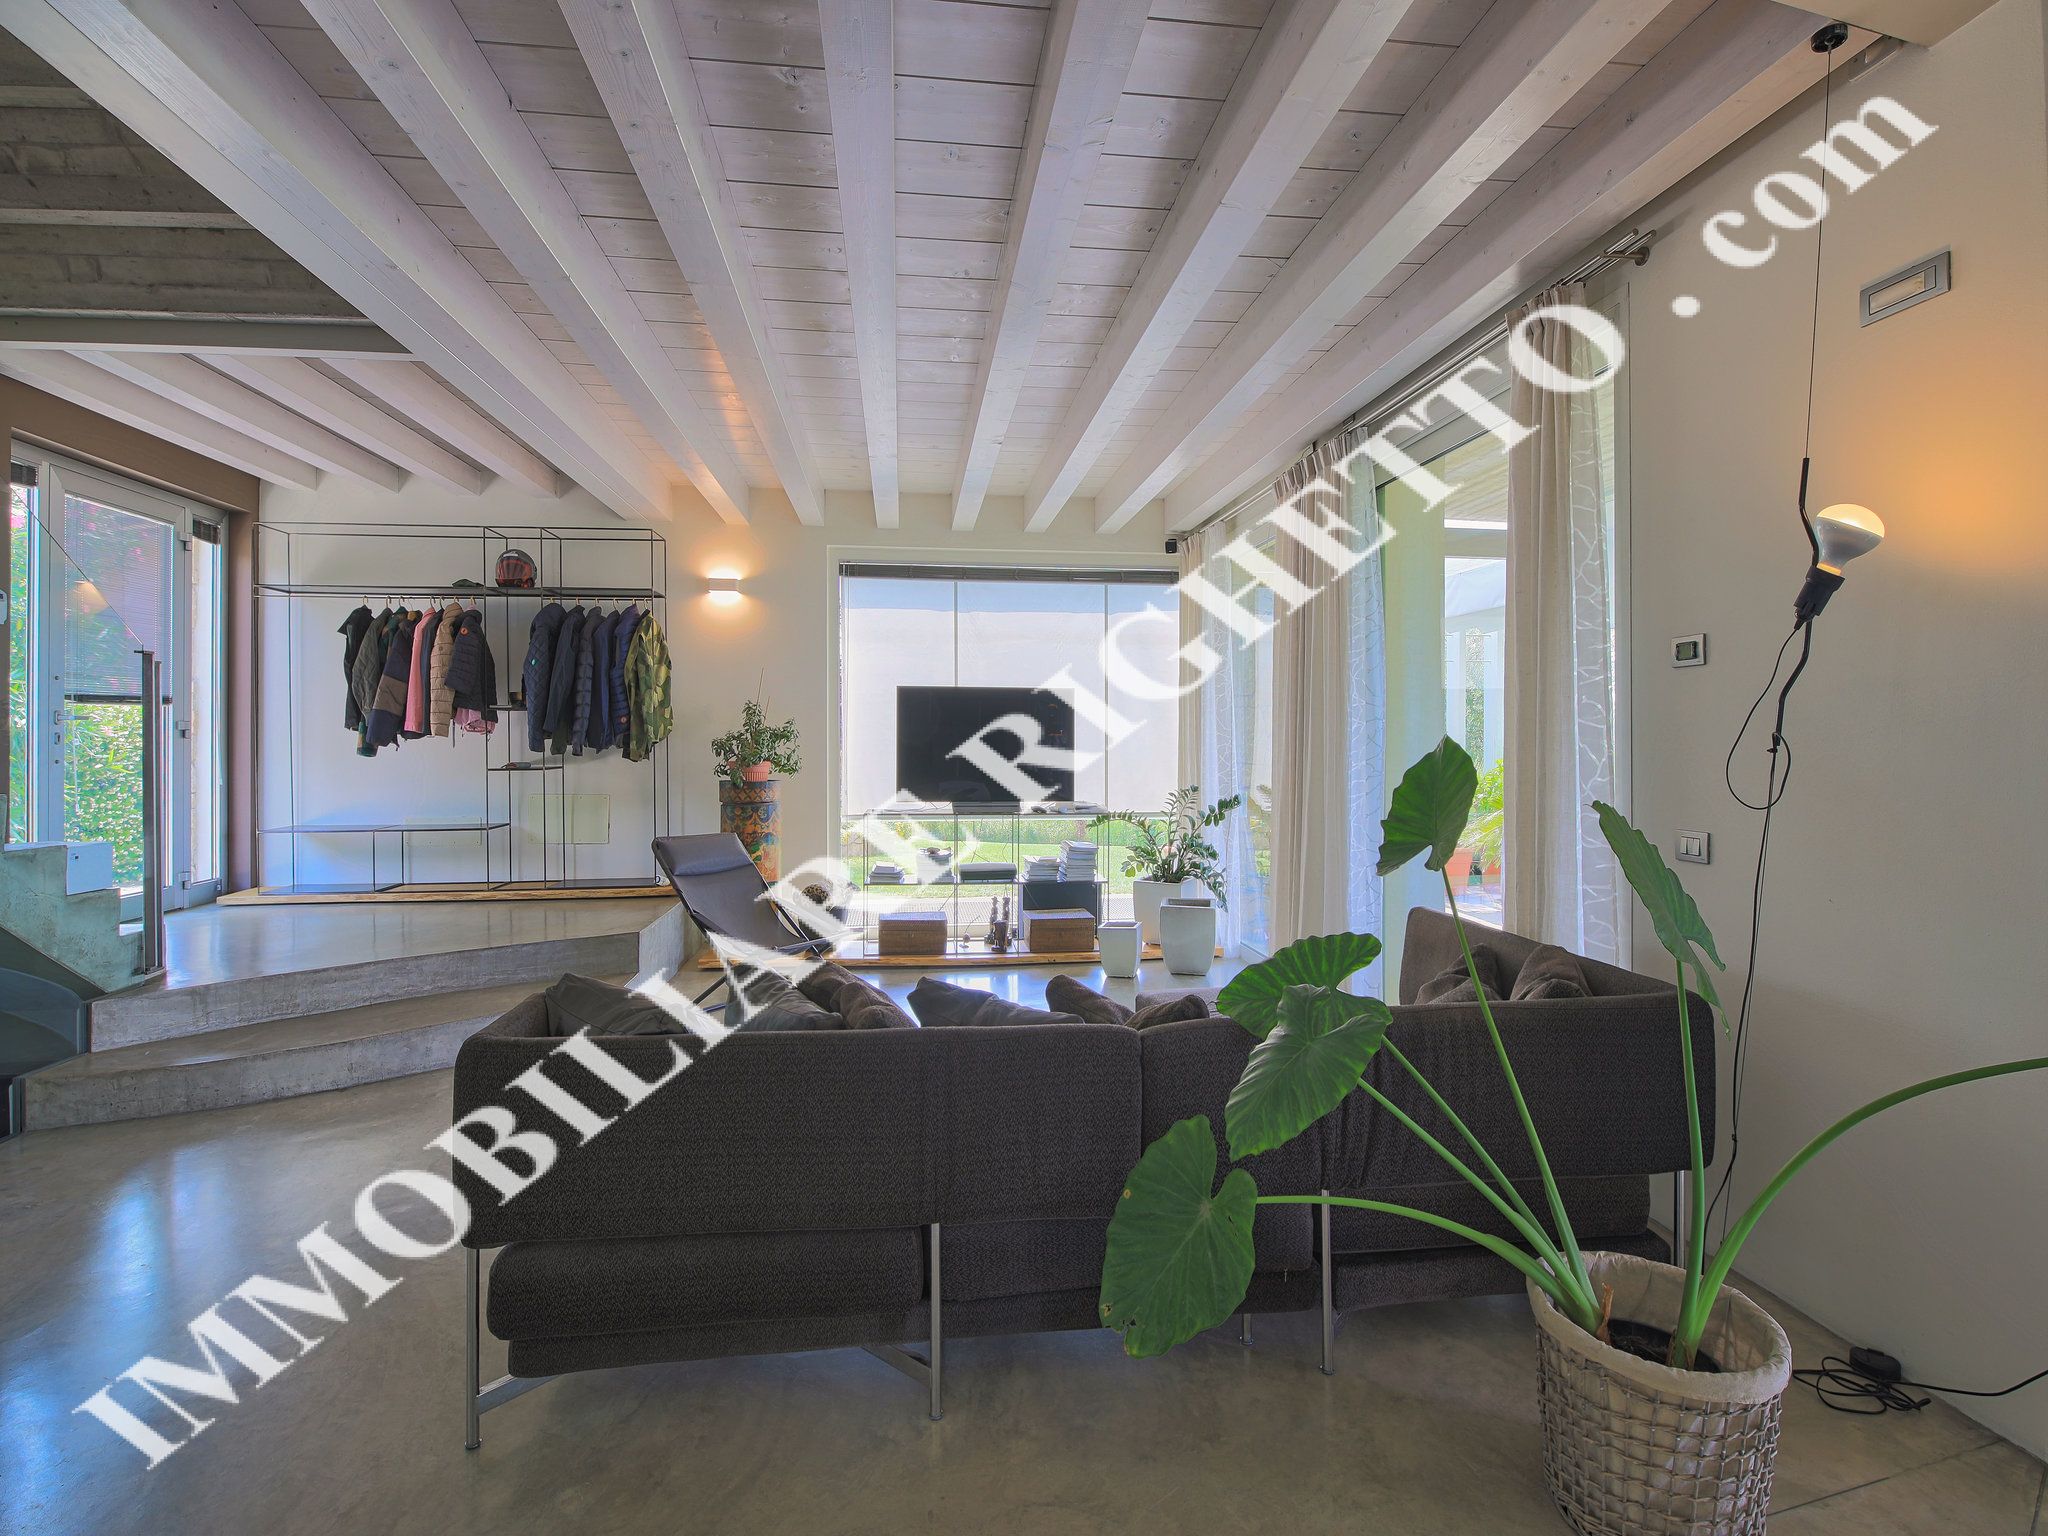 offer property for sale Modern detached villa with SPLENDID LAKE VIEW.